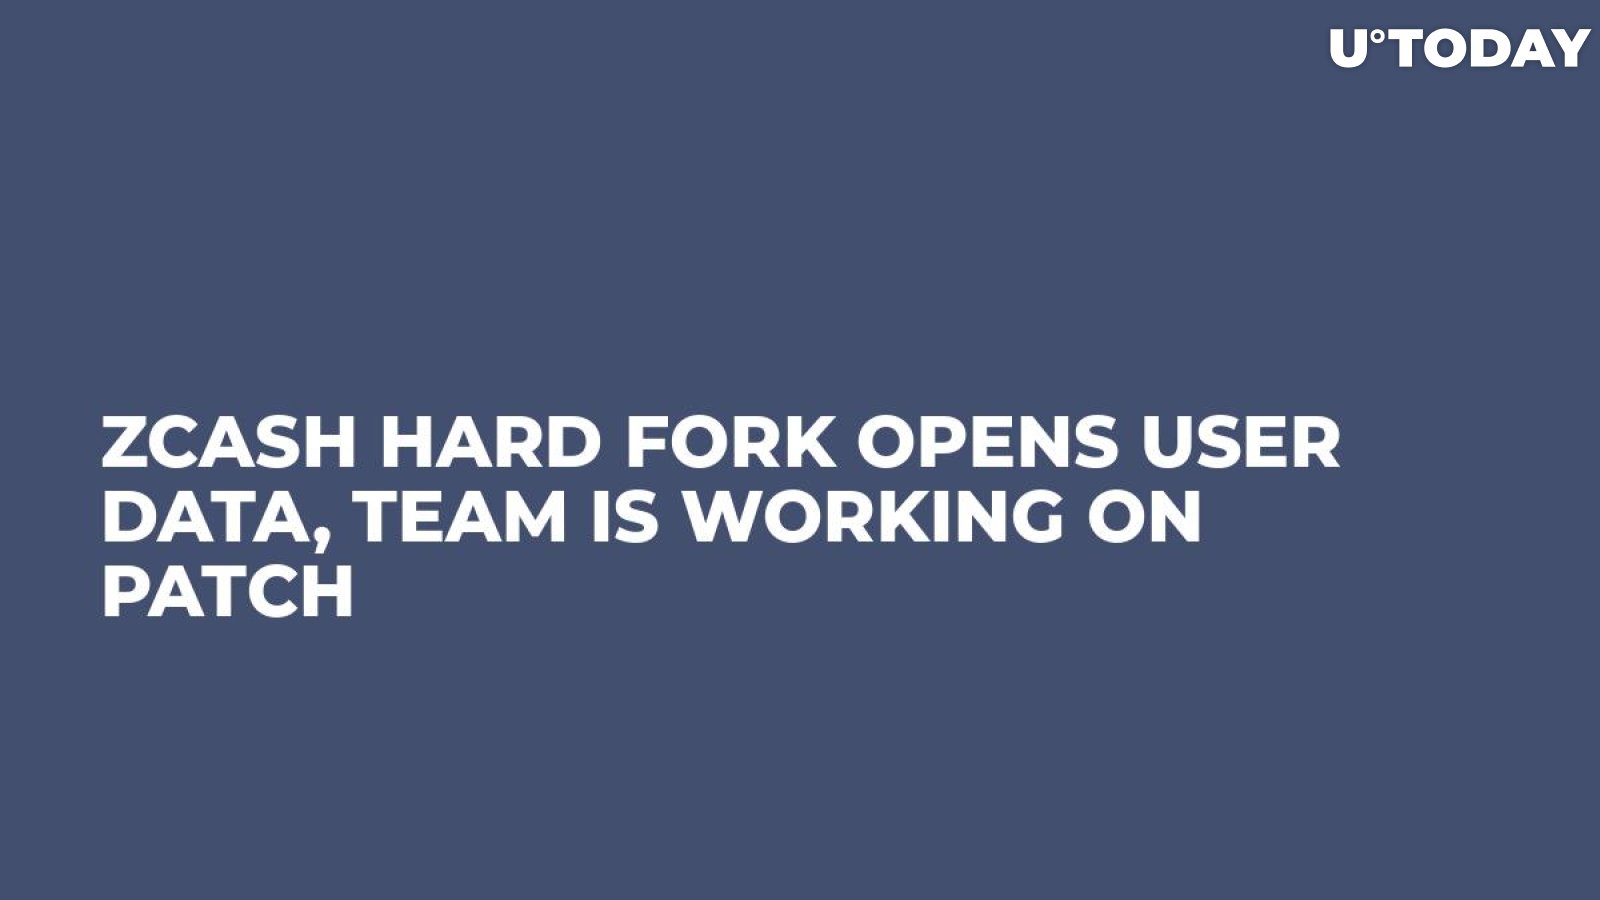 Zcash Hard Fork Opens User Data, Team Is Working on Patch